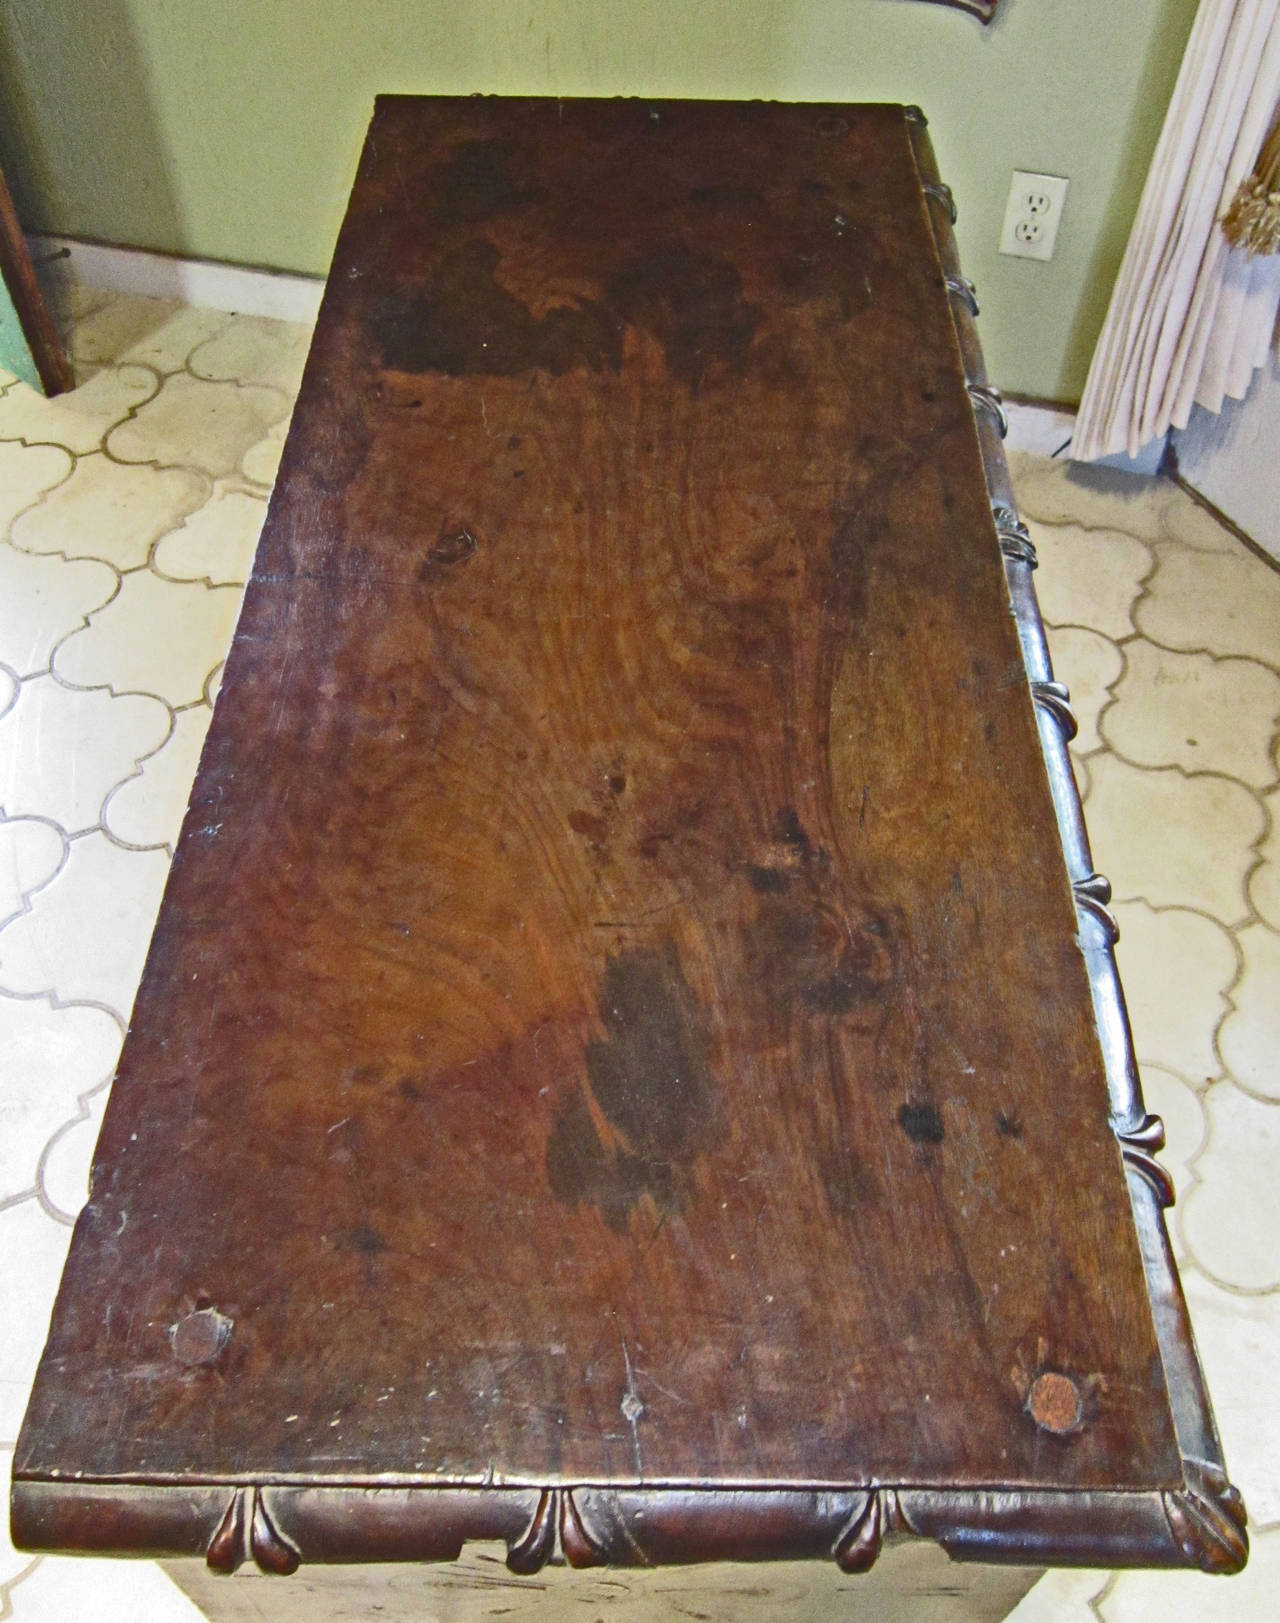 This very old piece is typical of the marquetry work done in the Mexican state of Oaxaca in the late 17th century early 18th C.  It shows it's age beautifully on the outside, a rich patina that Mesquite wood develops with time due to it's extreme